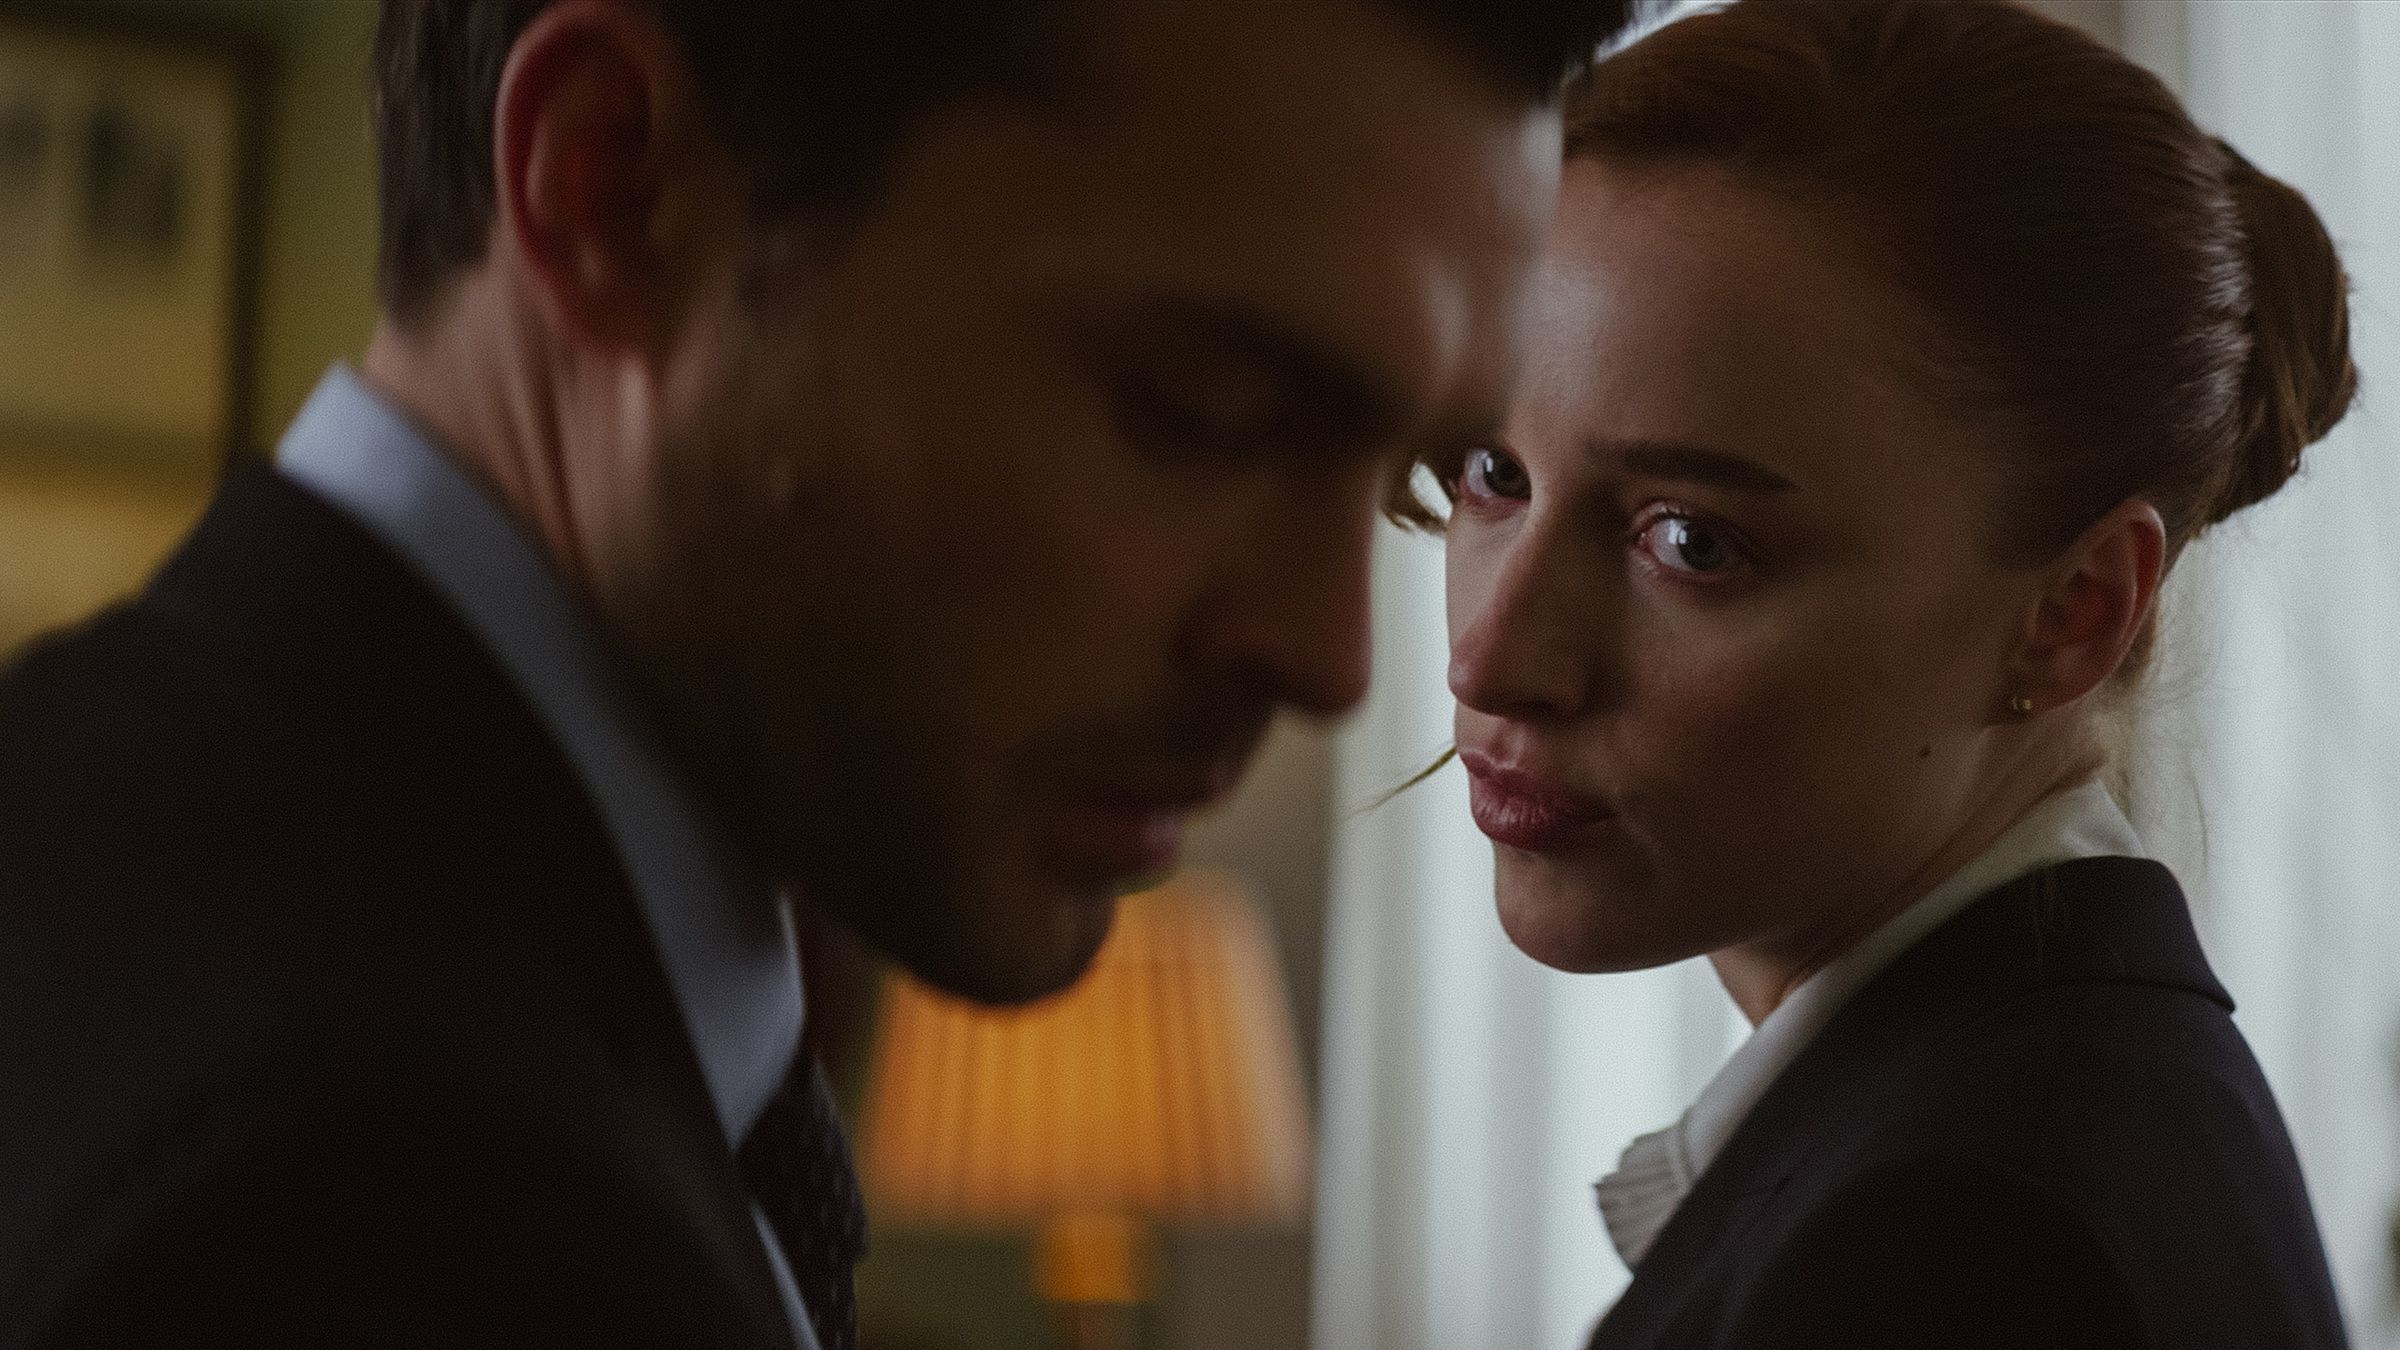 A still image of Phoebe Dynevor and Alden Ehrenreich in the film Fair Play.